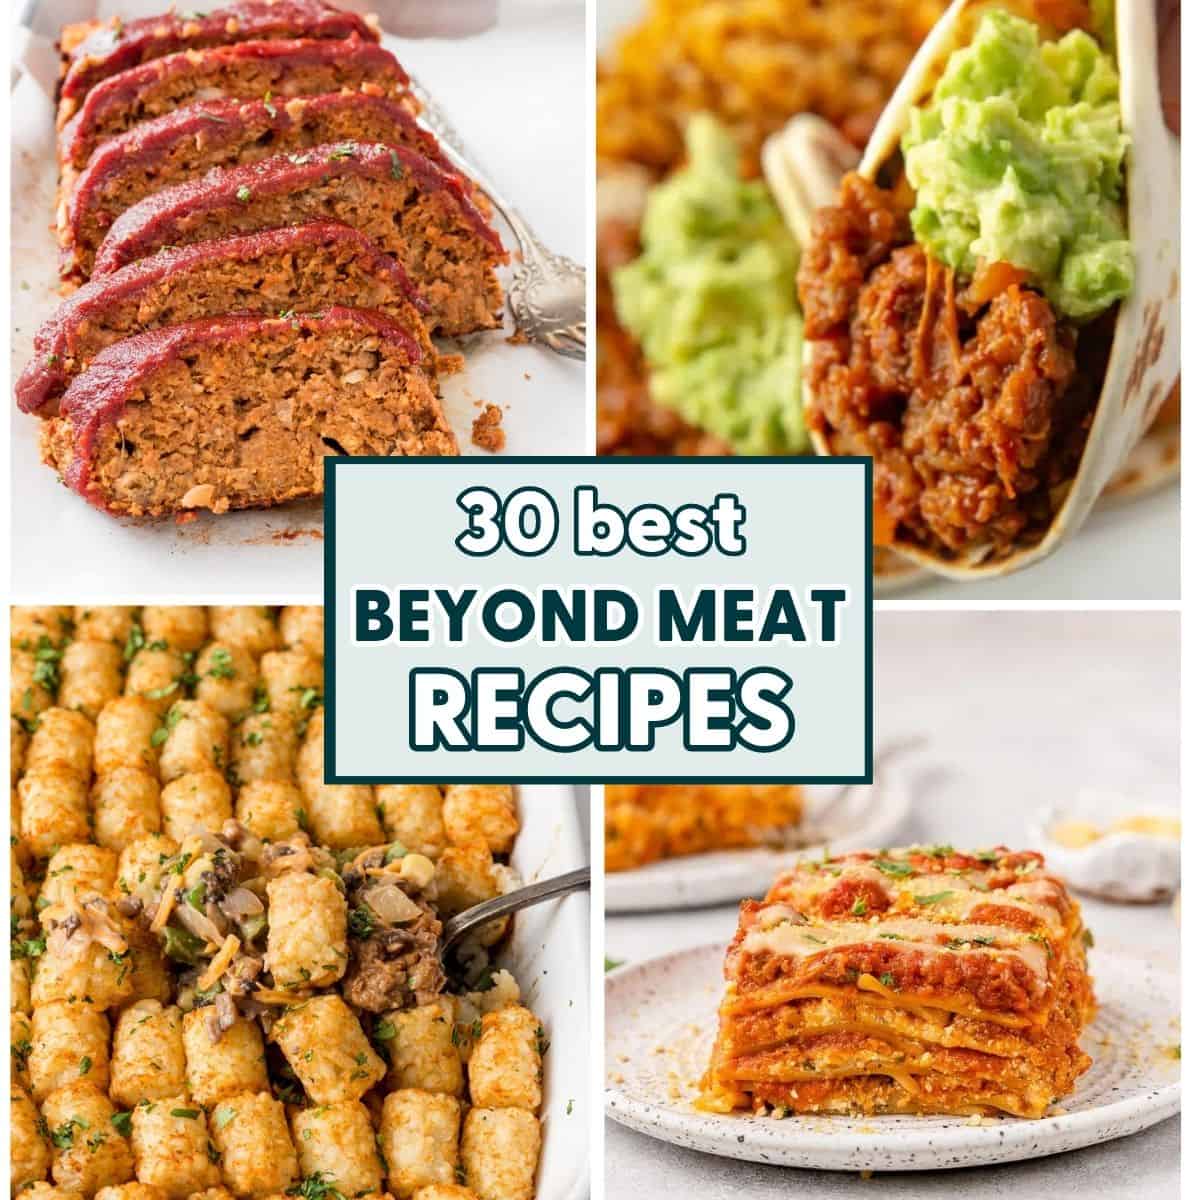 Beyond Meat's new vegan steak tips: How they taste and where to